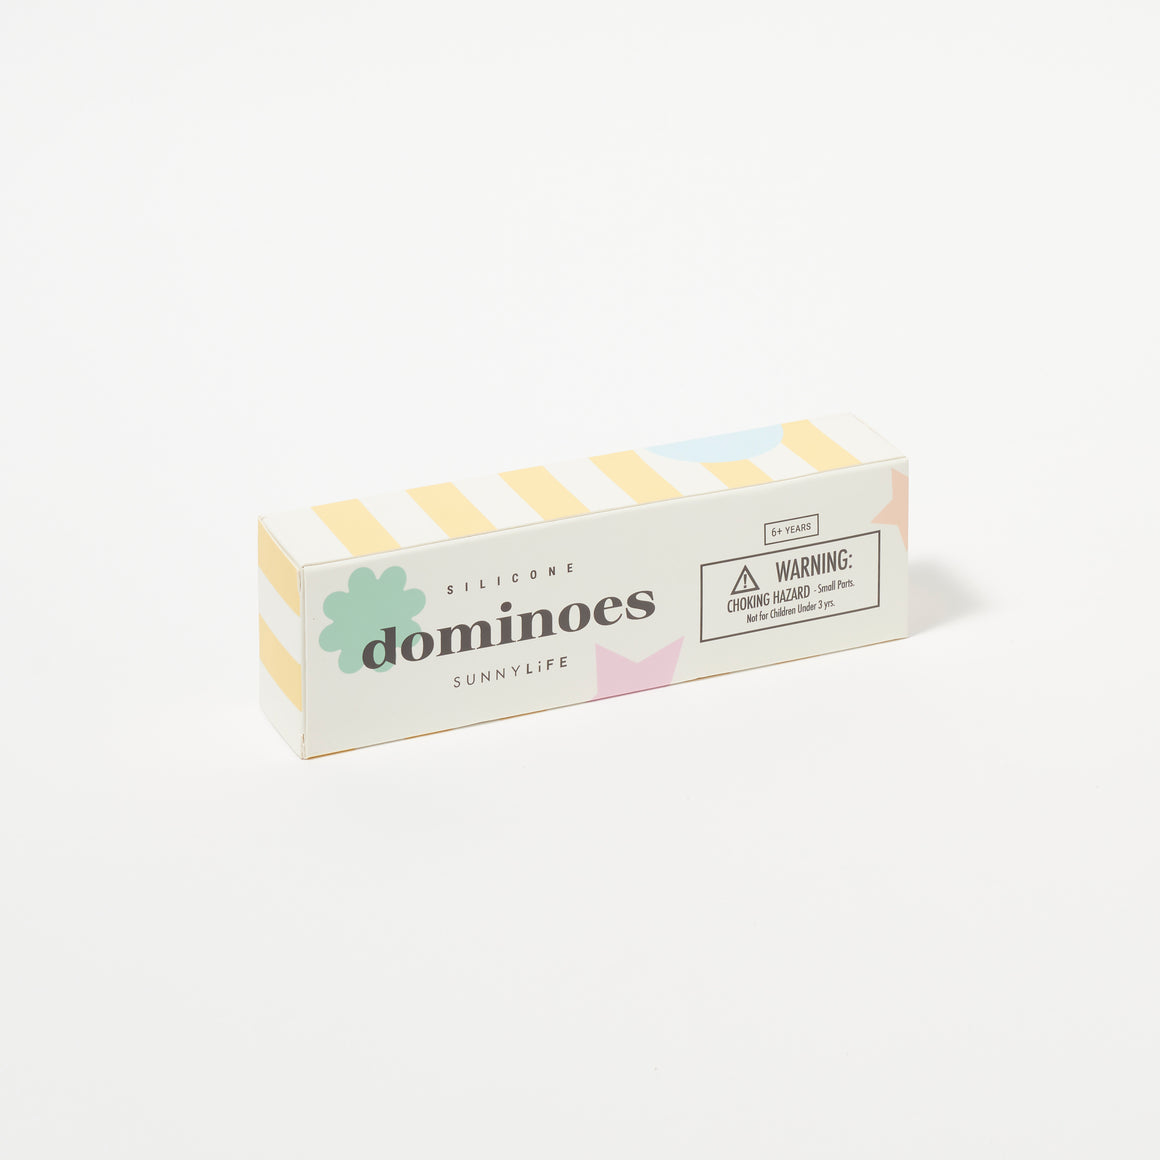 Games | Dominoes Silicone